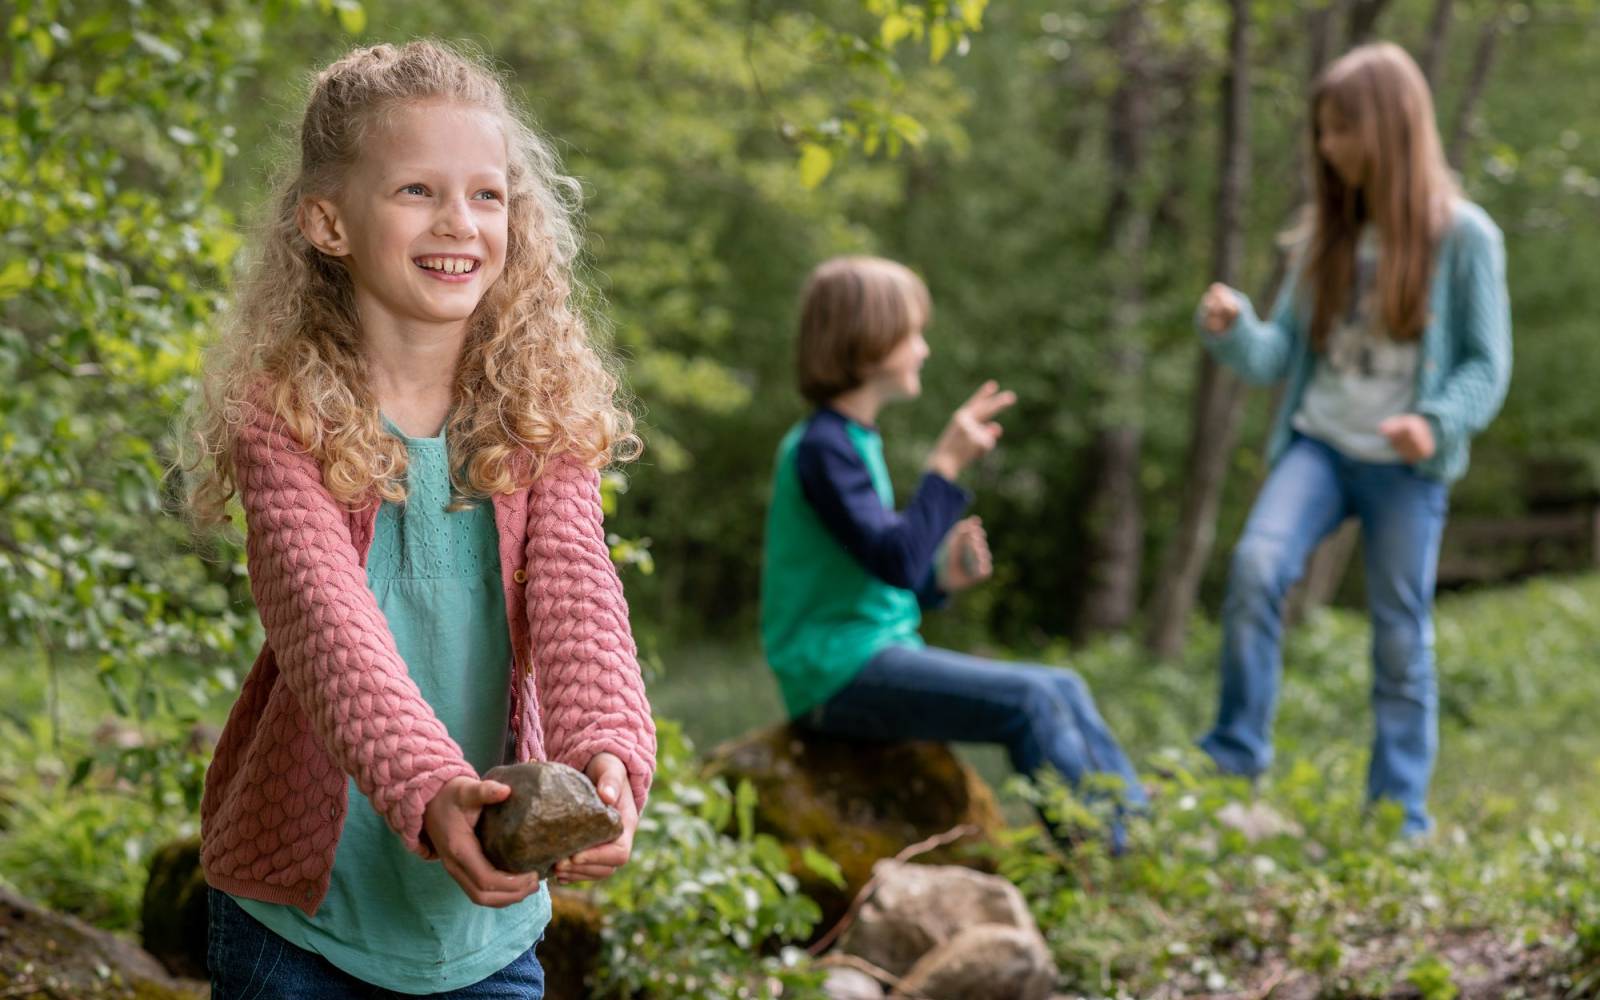 A smiling girl in nature holding a rock and two children playing in the background